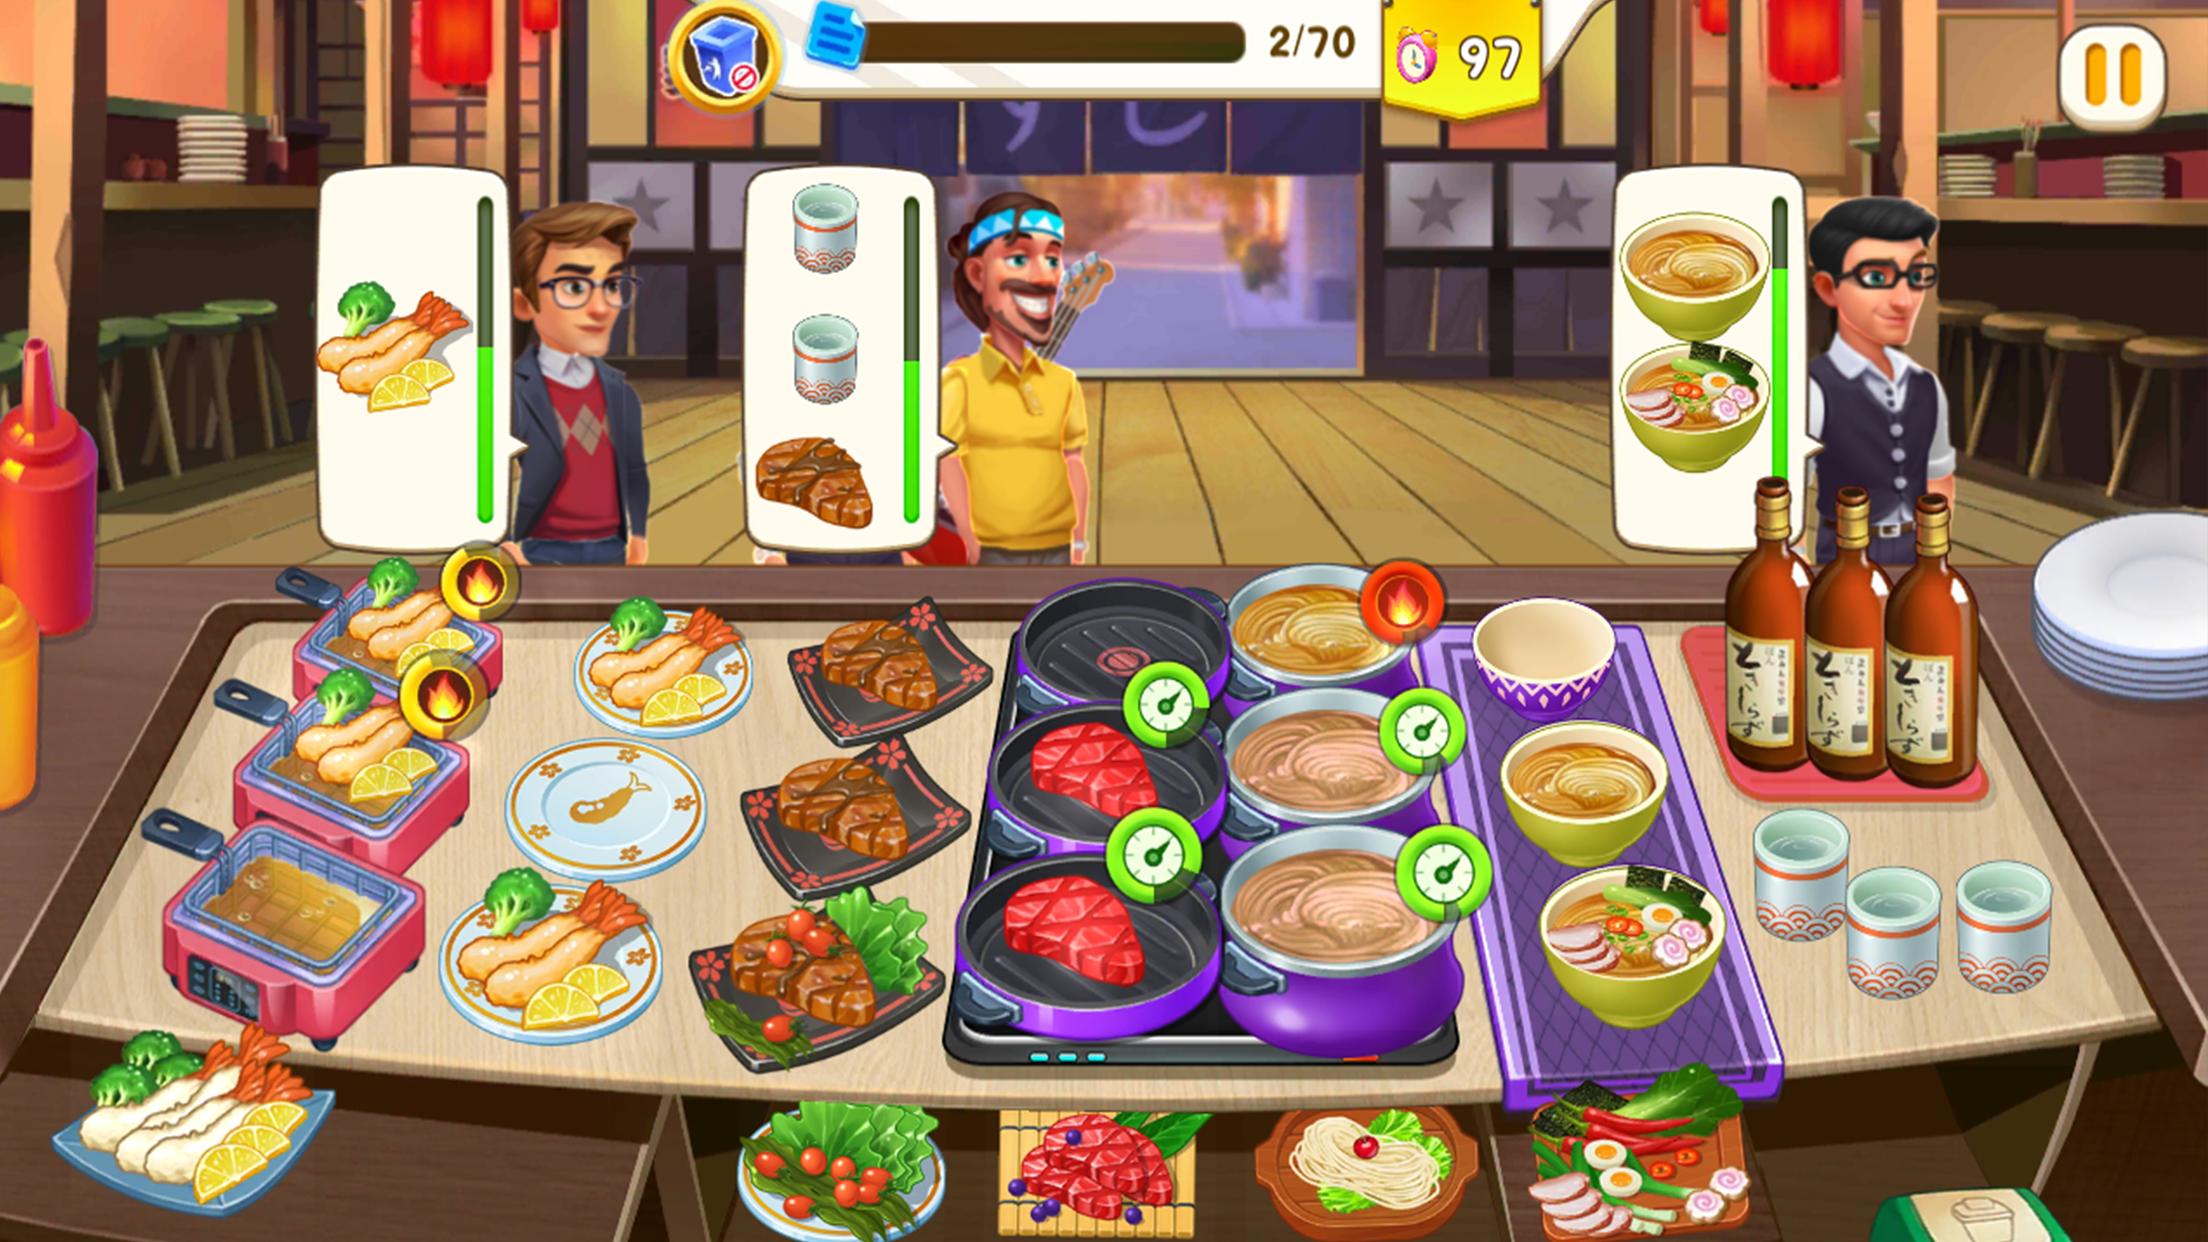 Cooking Rush Bake it to delicious 2.1.2 Screenshot 14